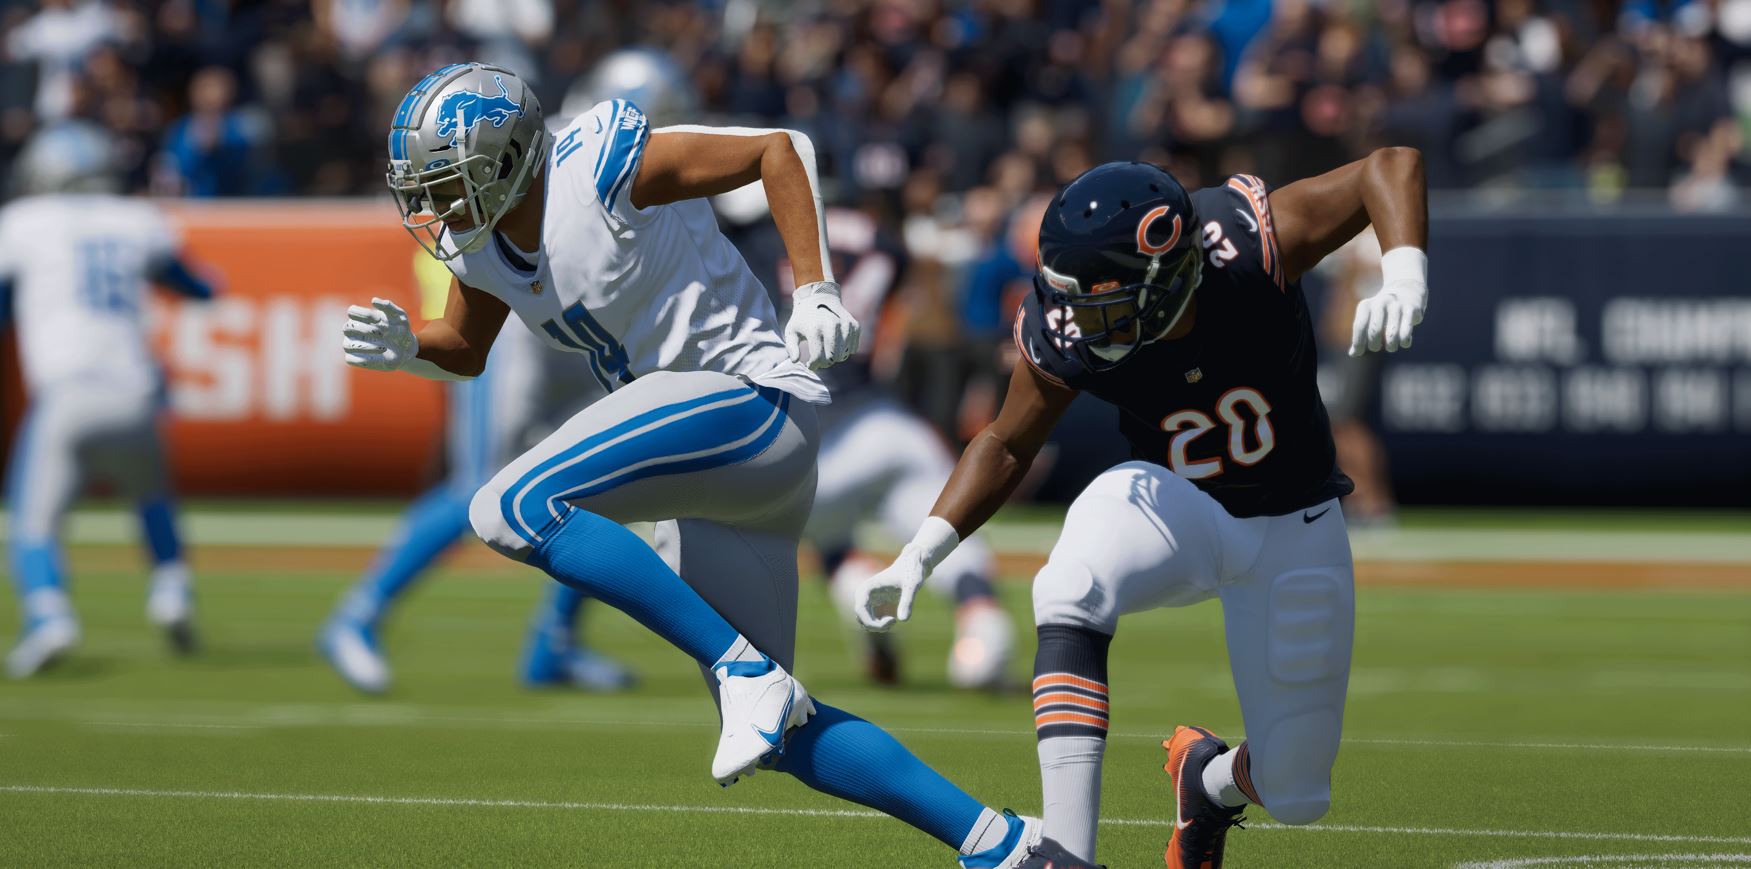 A Bears player prepares to tackle a Lions player.